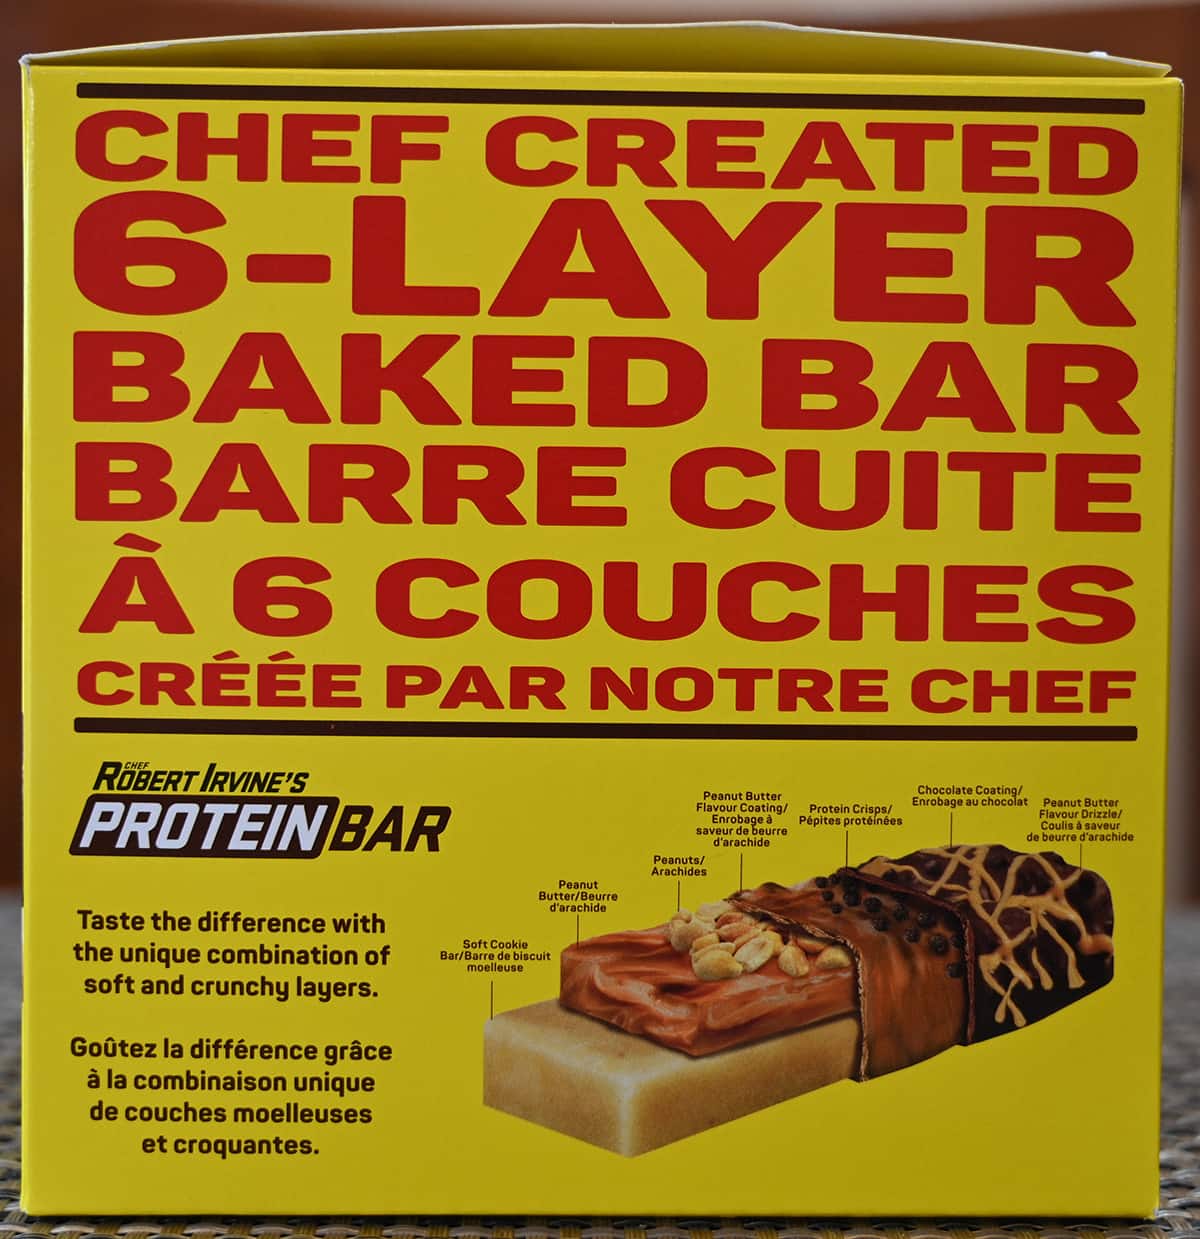 Image of the back of the box of the Robert Irvine's Protein Bars with the product description.